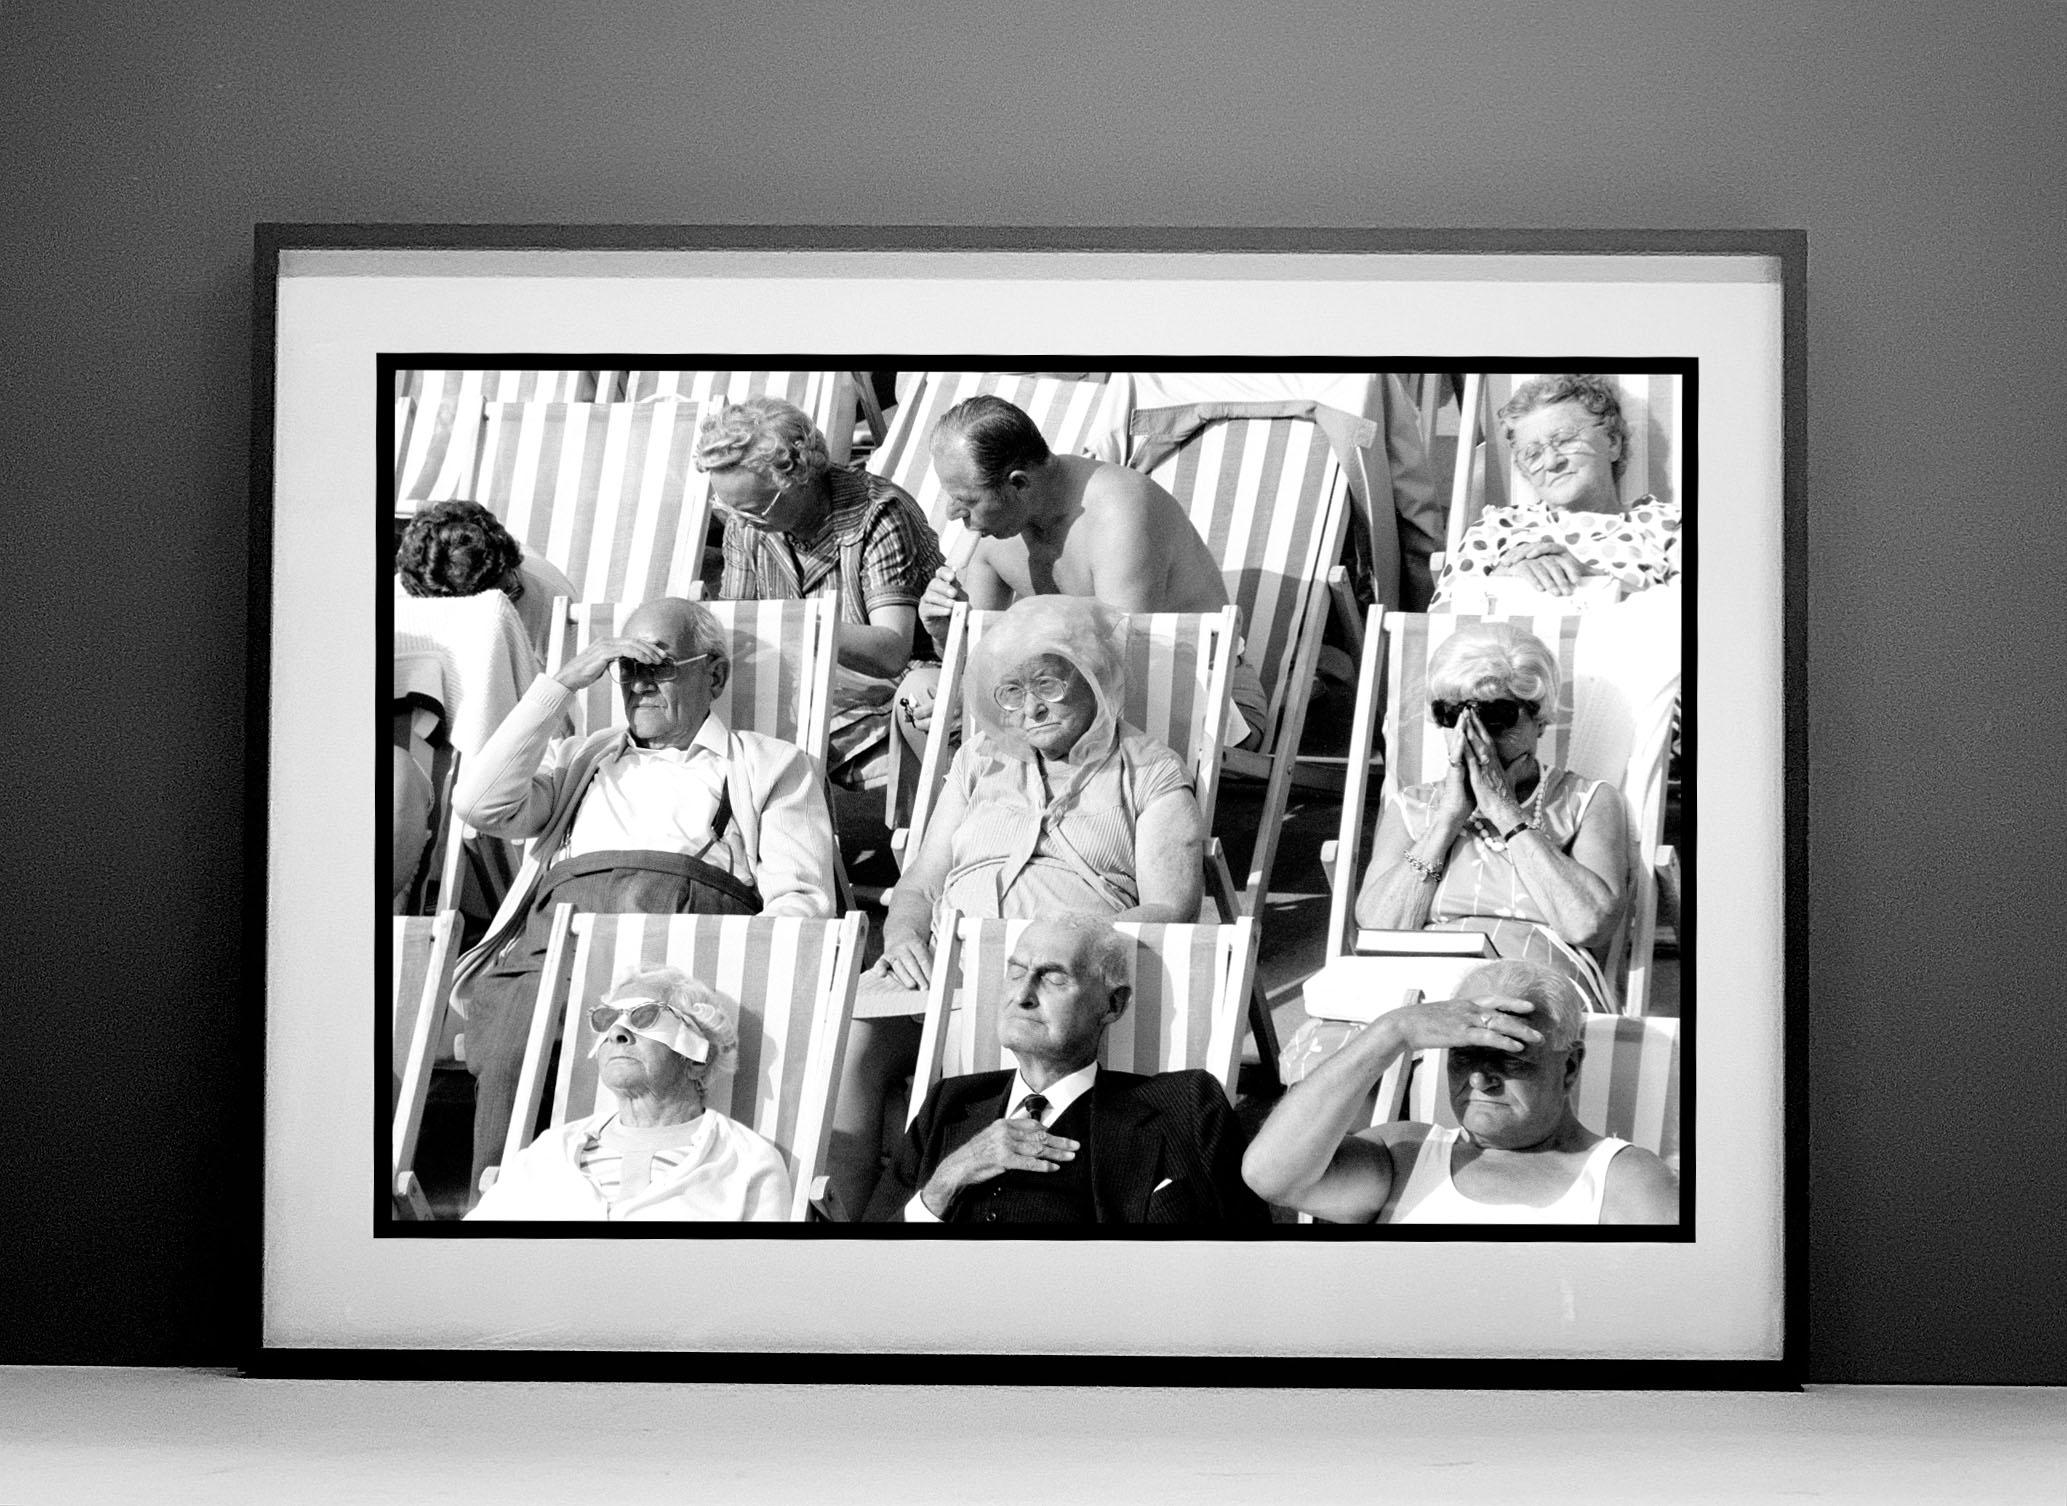 Bandstand II, Eastbourne, UK - Black and White Vintage Photography - Print by Samuel Field